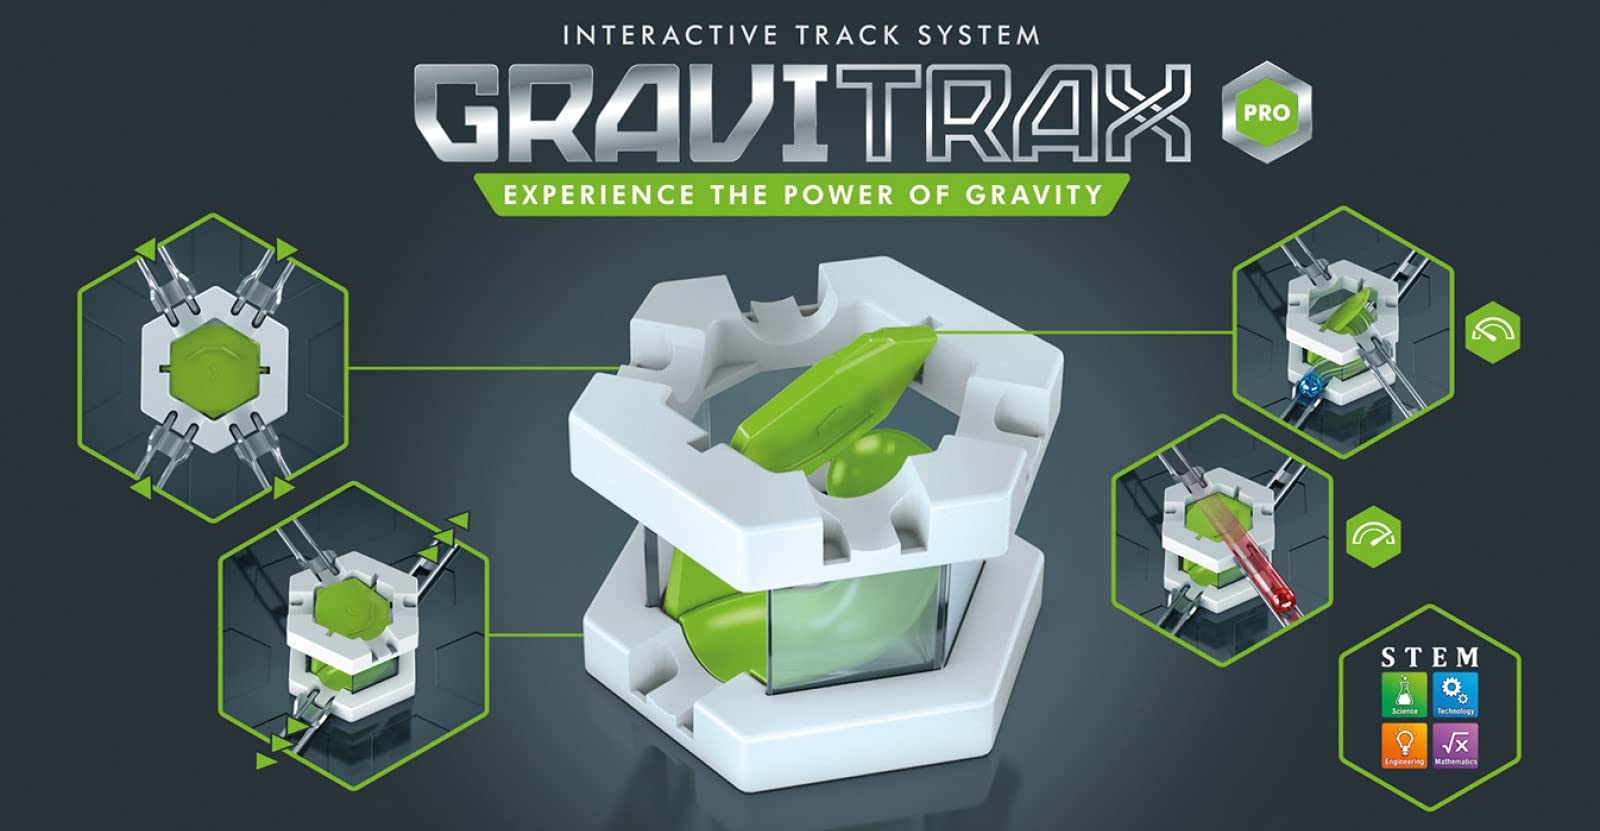 Ravensburger GraviTrax PRO Splitter Accessory - Marble Run and STEM Toy for Boys and Girls Age 8 and Up - Accessory for 2019 Toy of The Year Finalist GraviTrax